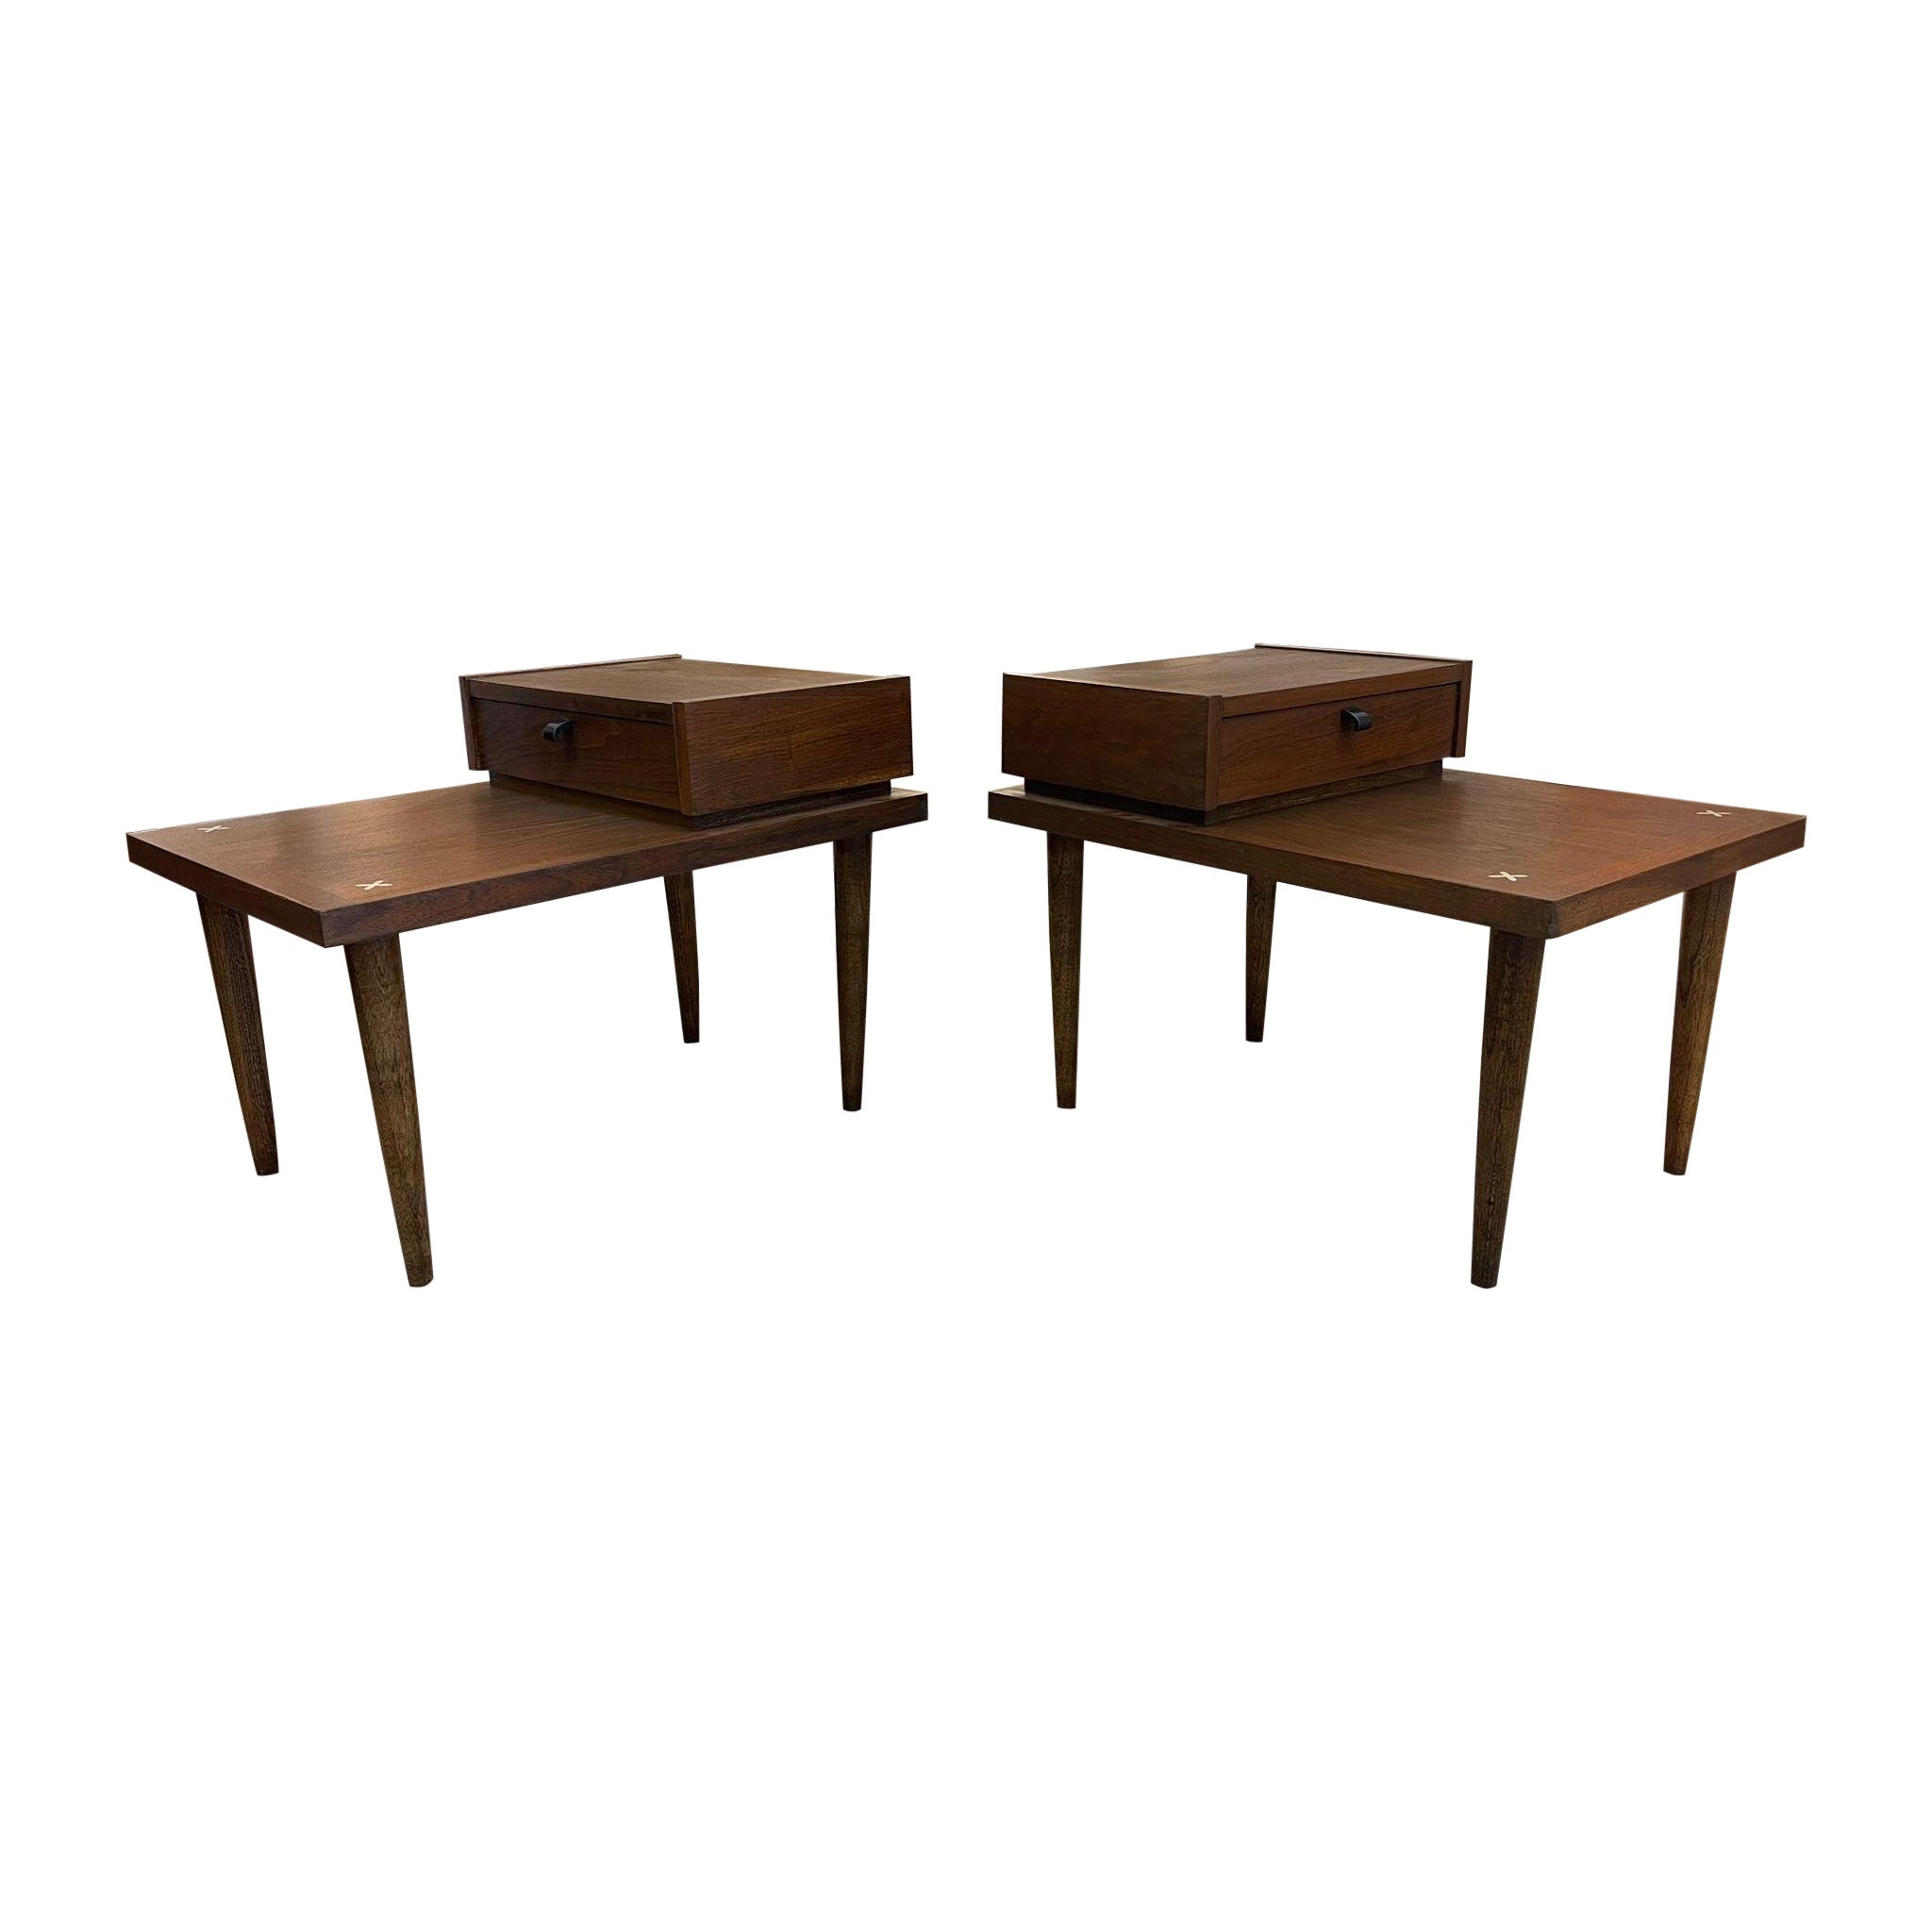 Vintage Mid Century Modern Pair of End Tables by American of Martinsville 